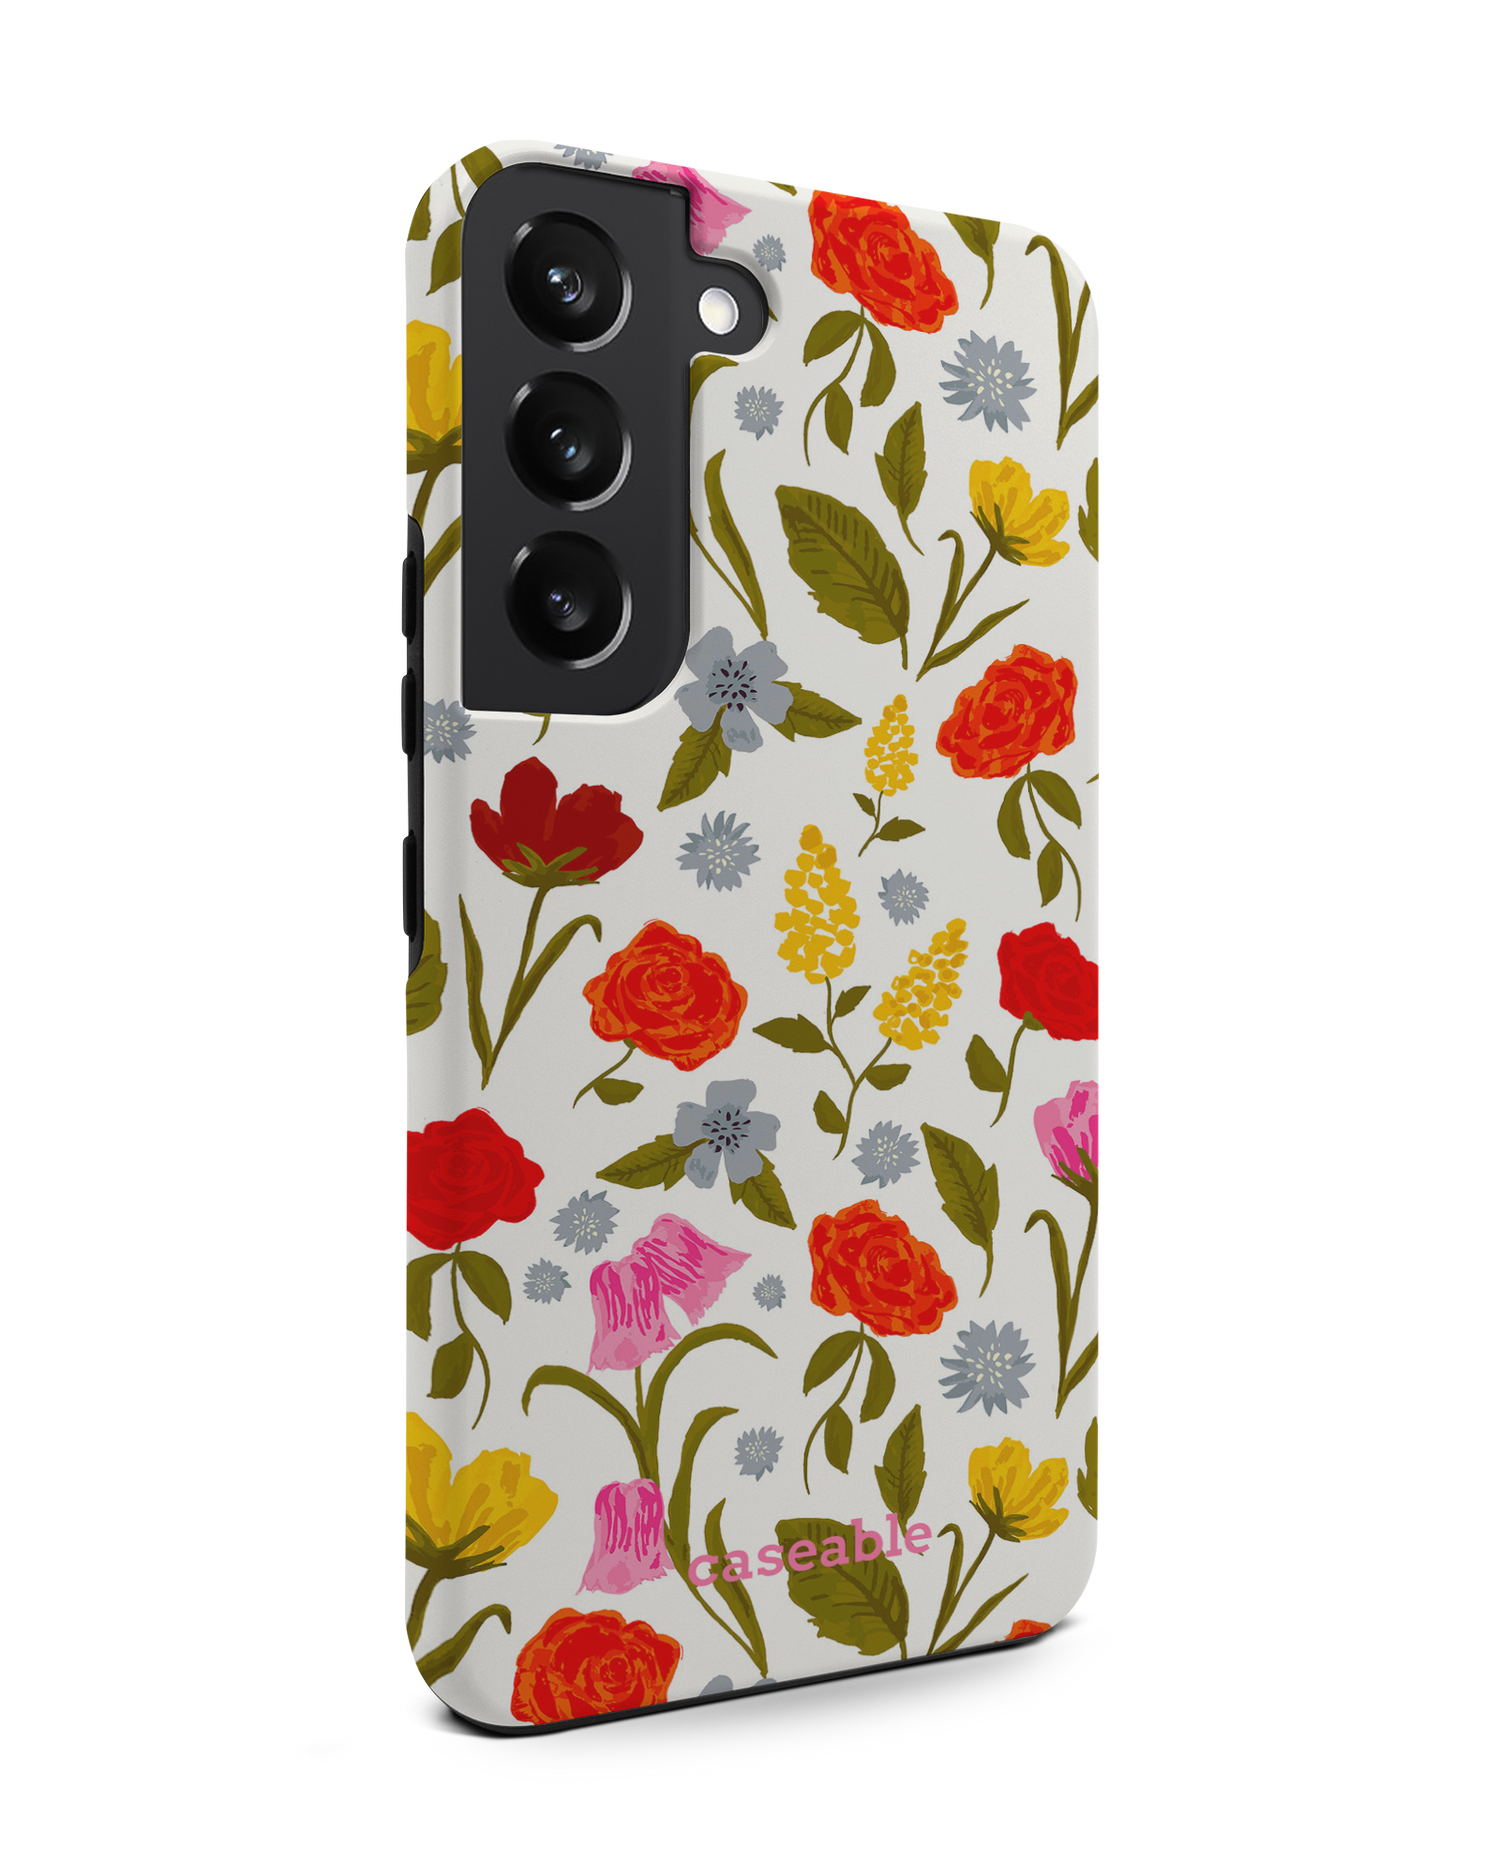 Botanical Beauties Premium Phone Case Samsung Galaxy S22 5G: View from the left side